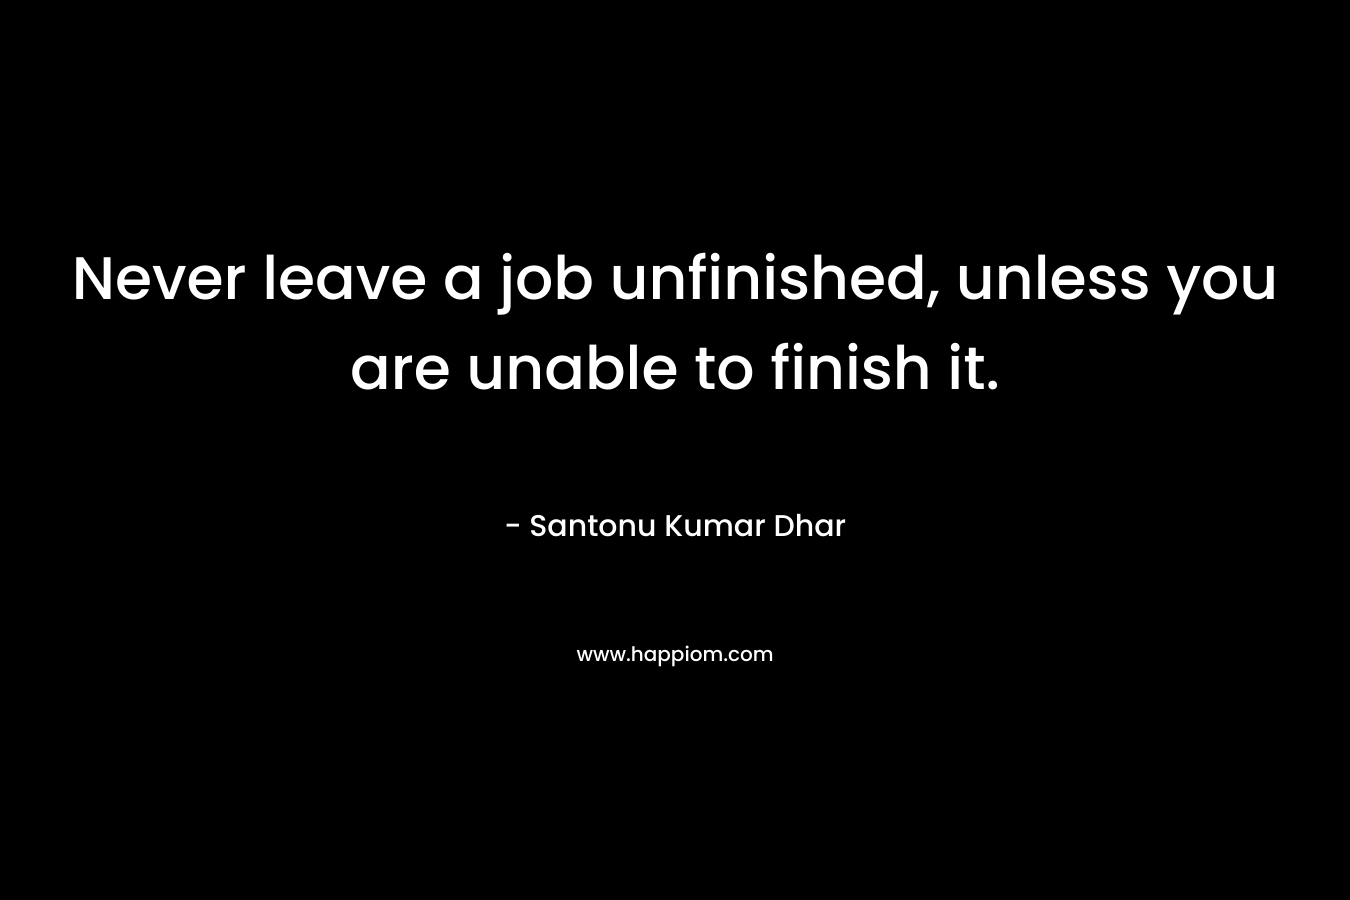 Never leave a job unfinished, unless you are unable to finish it. – Santonu Kumar Dhar